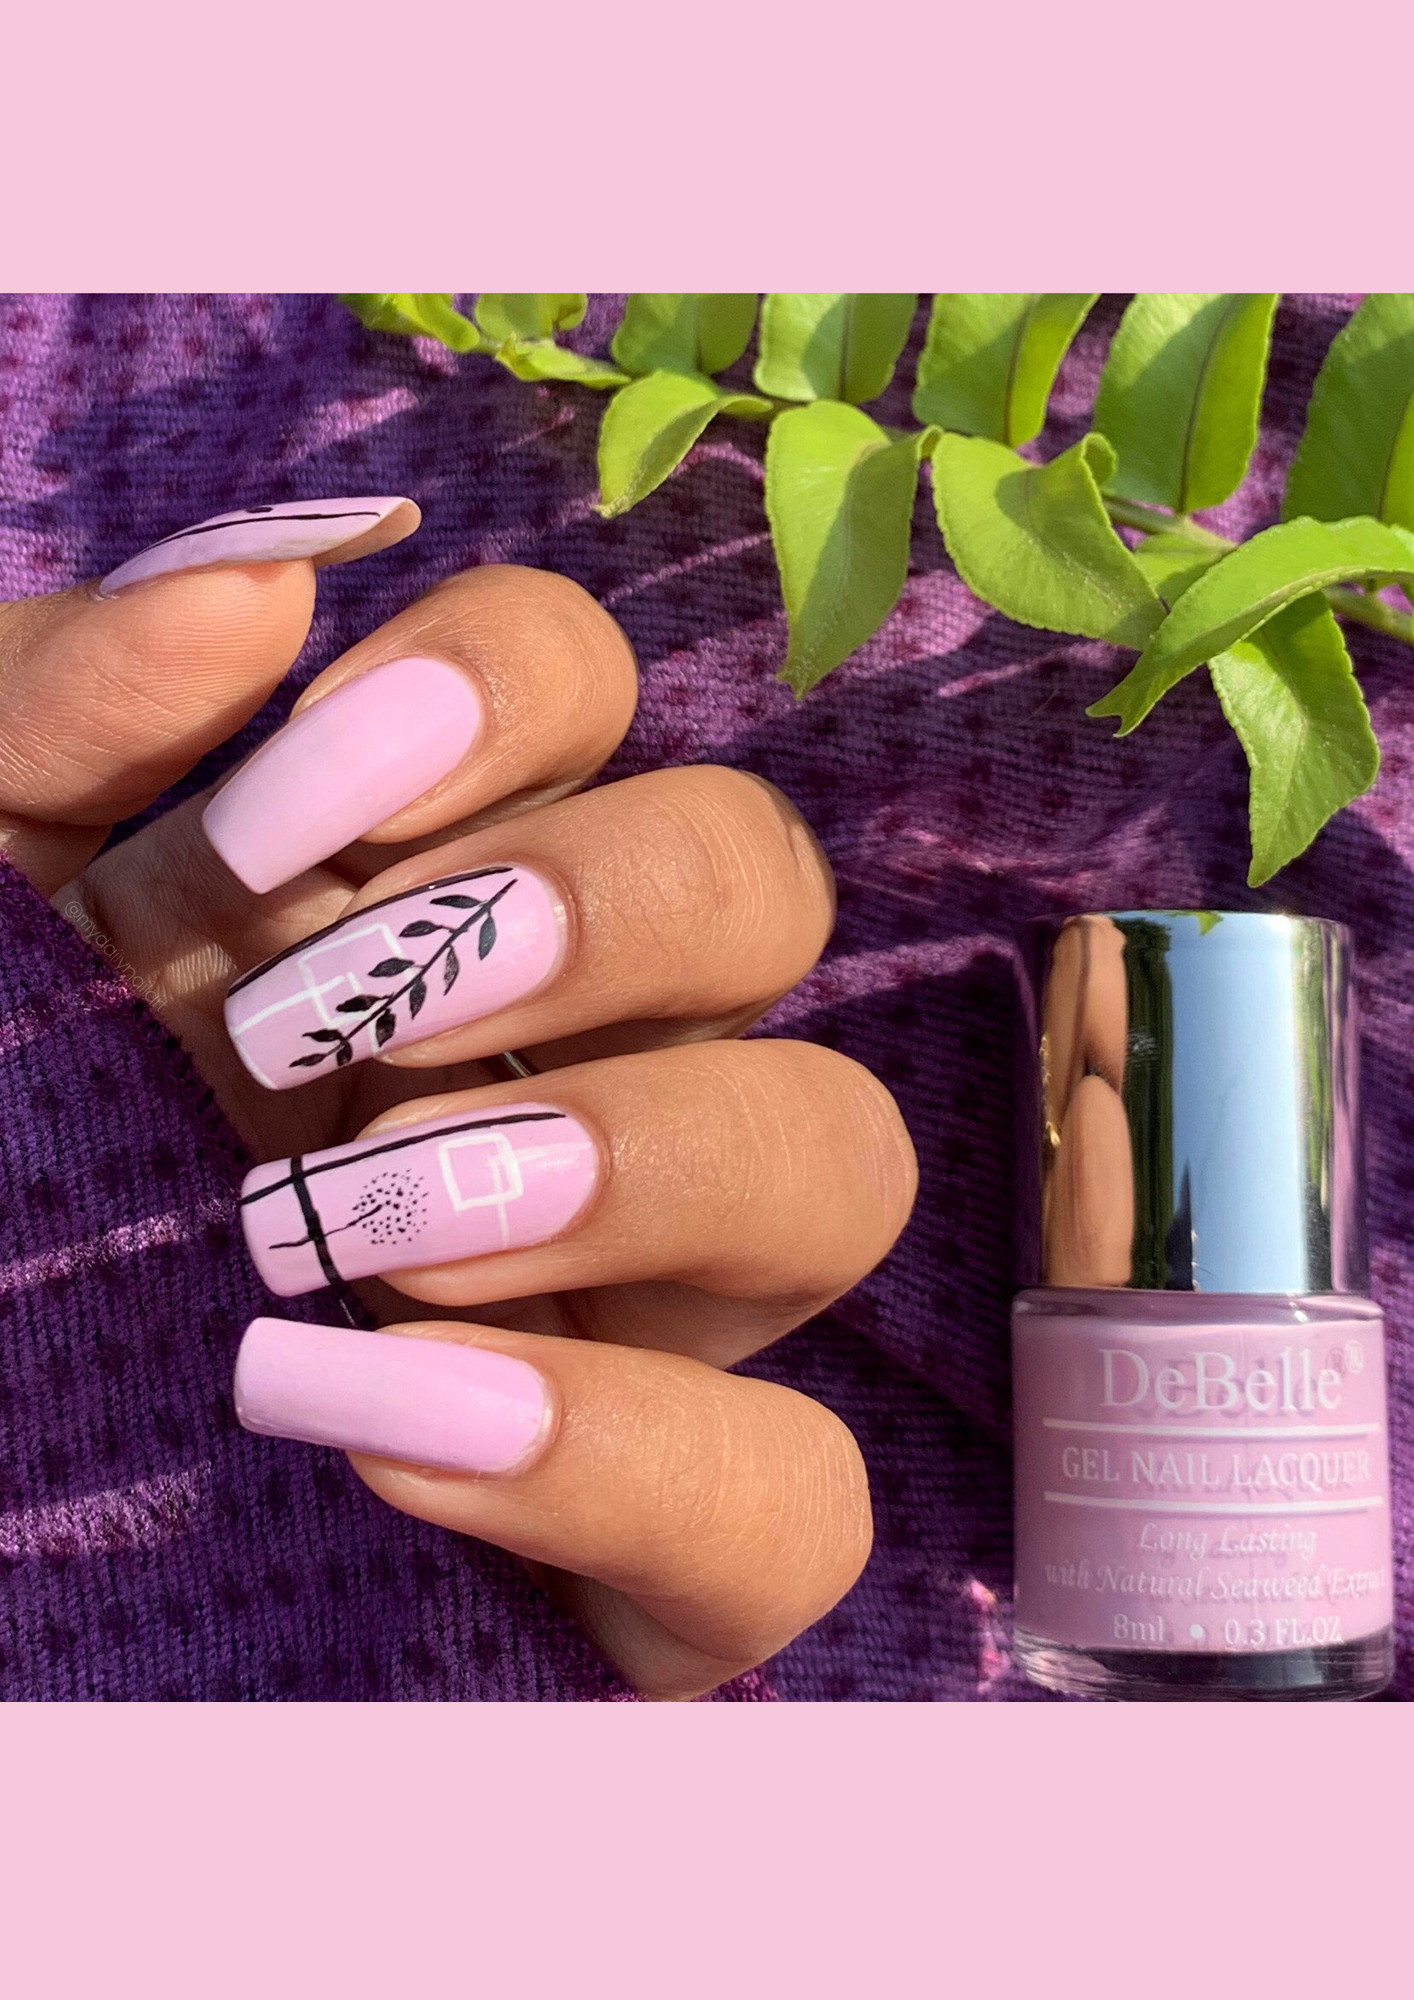 Just some lilac nails for cheap 😂💜 : r/RedditLaqueristas